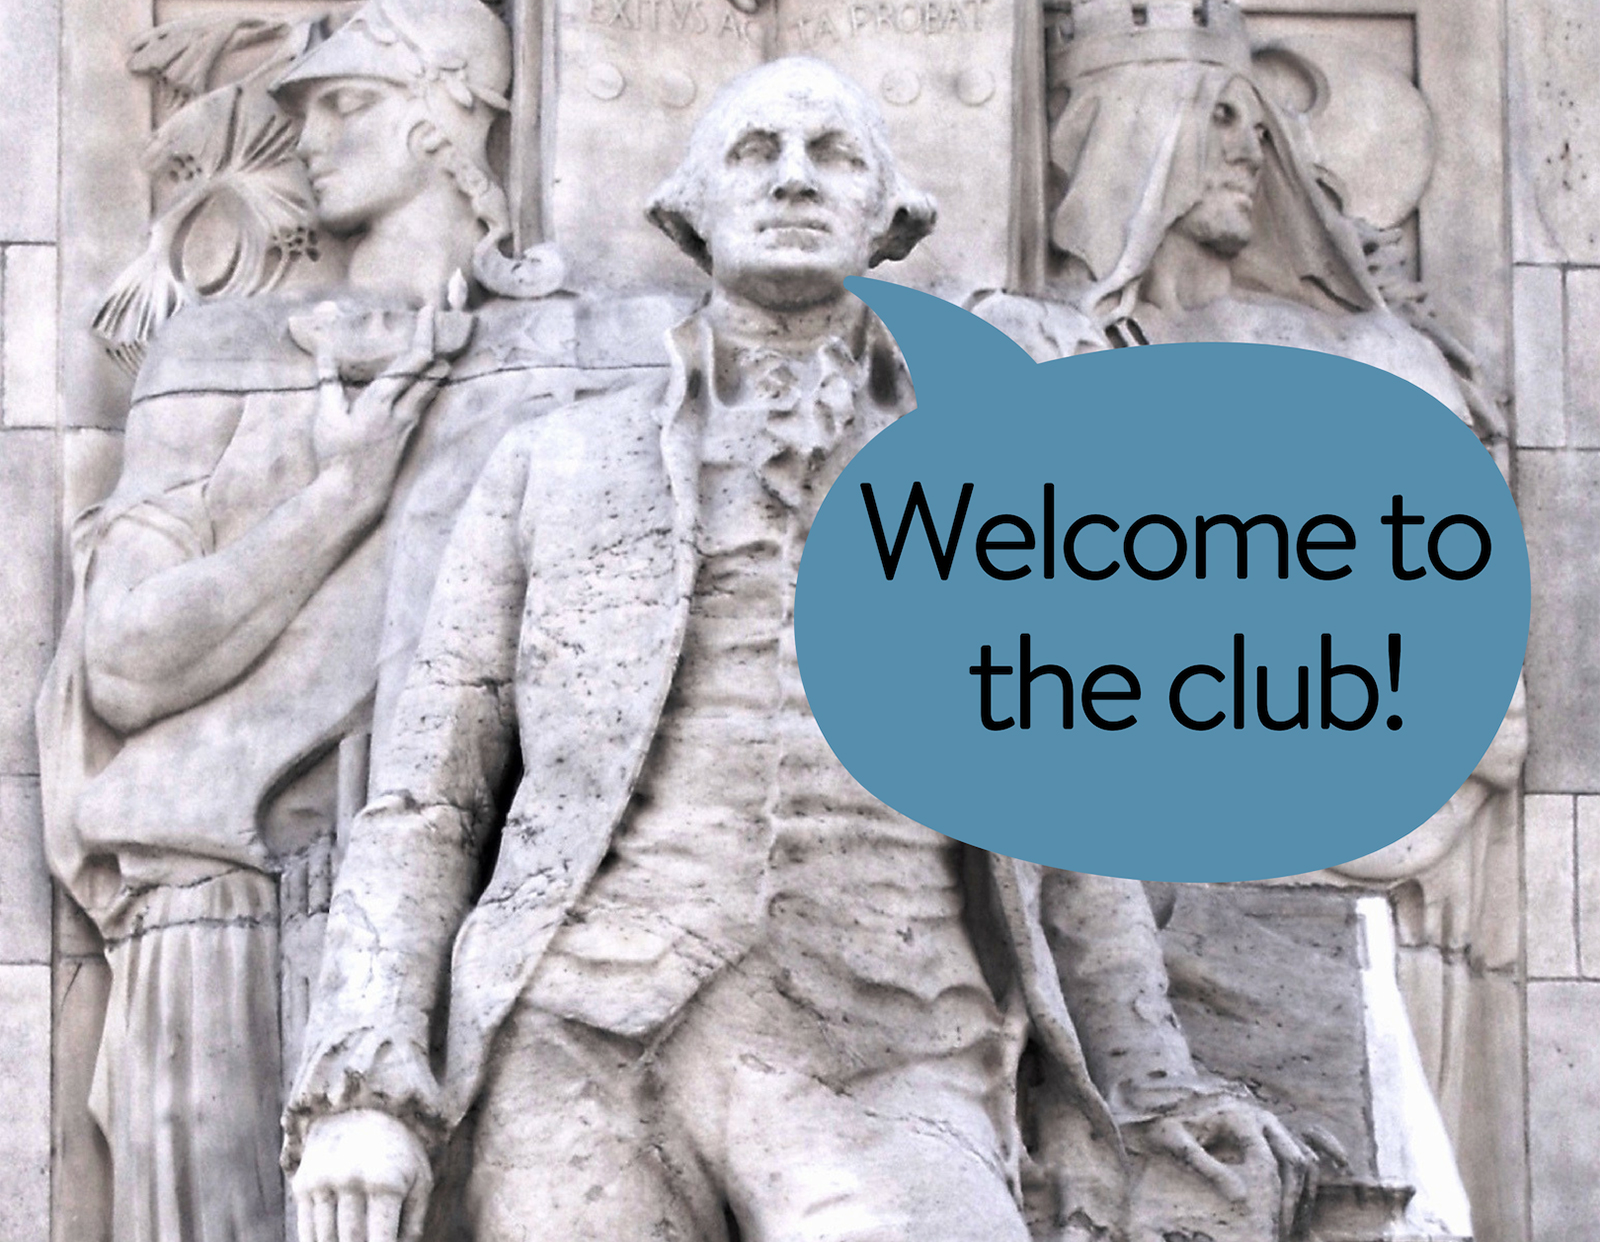 a statue of George Washington on the arch with a speech bubble reading "Welcome to the club!"